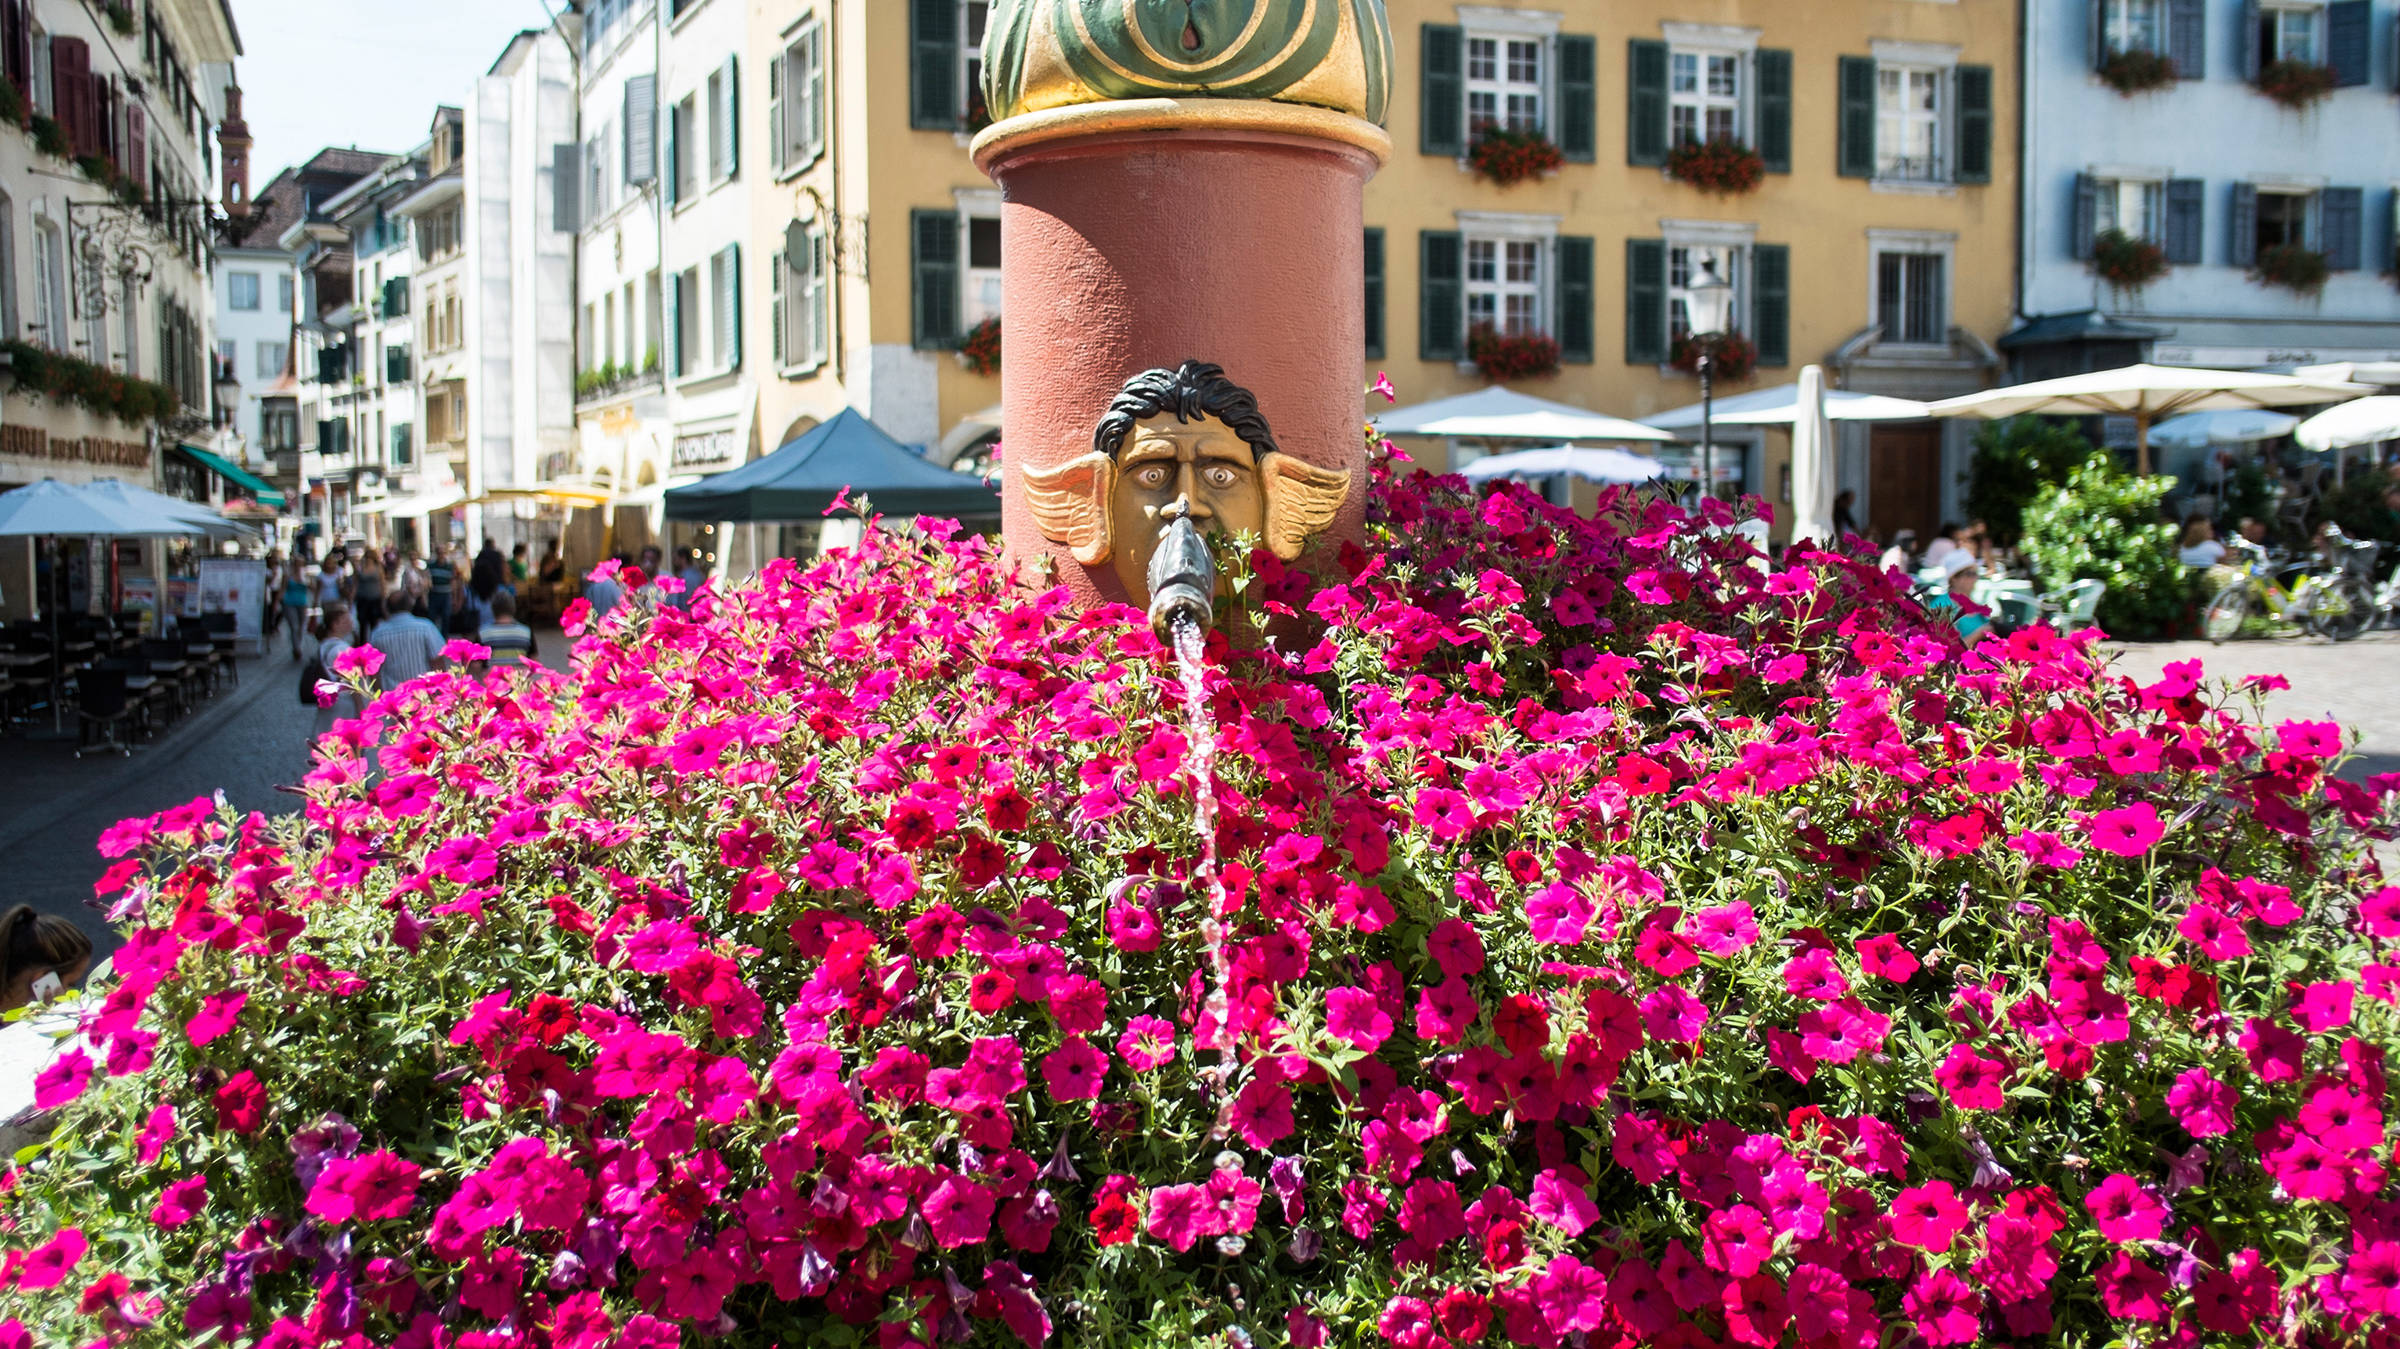 Fountain in the Old town - H4 Hotel Solothurn - Official website